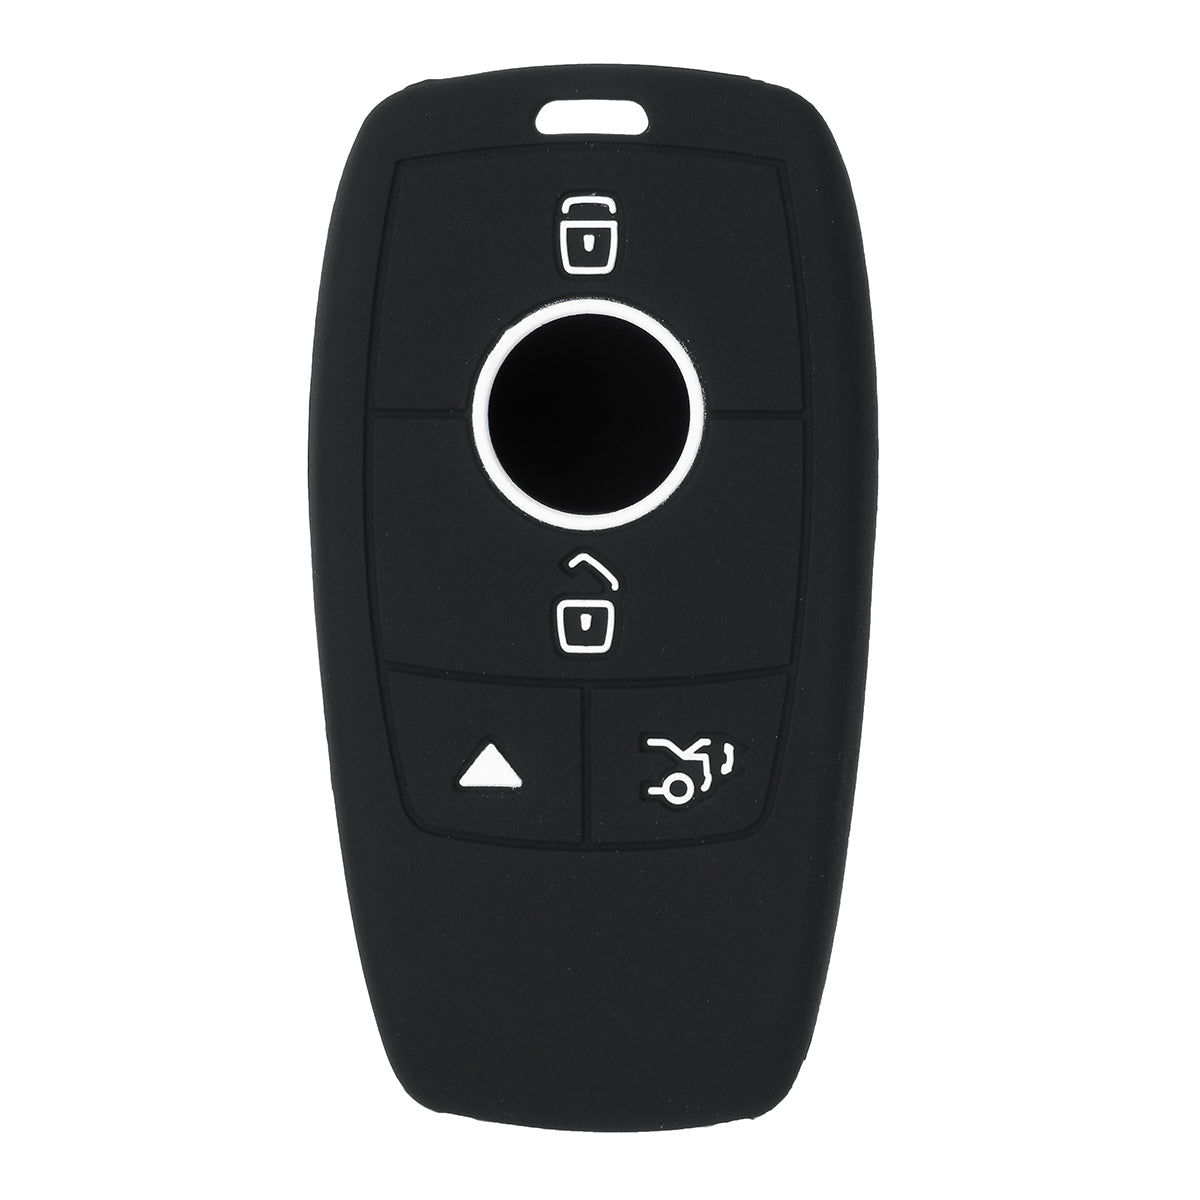 4 Buttons Silicone Car Remote Key Case/bag Protector Cover Holder for Mercedes for Benz E-Cl 2017 - Auto GoShop